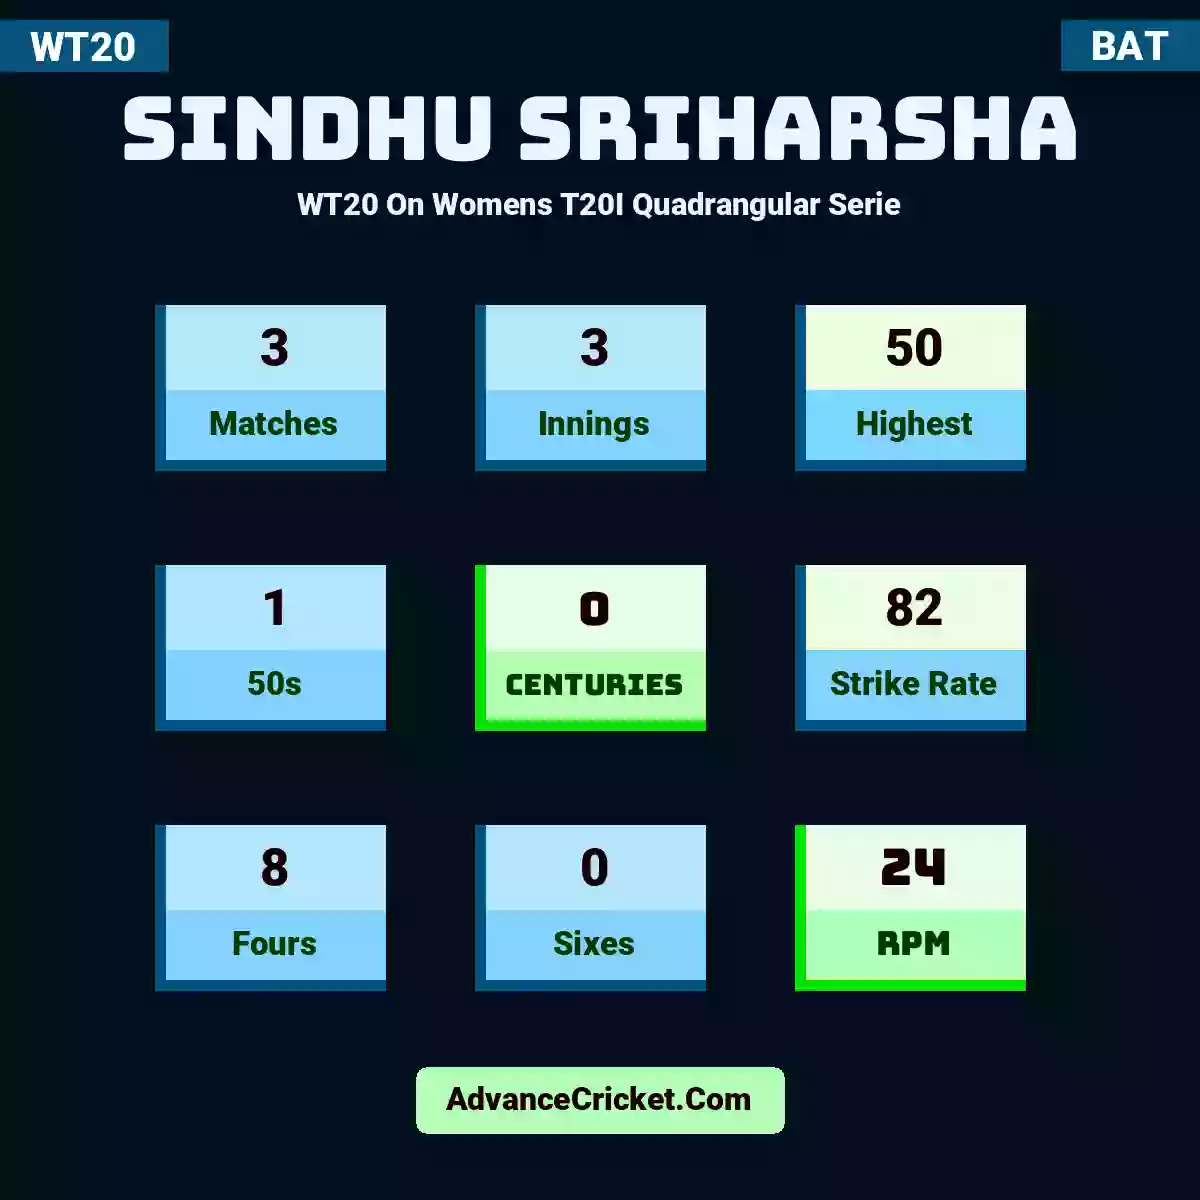 Sindhu Sriharsha WT20  On Womens T20I Quadrangular Serie, Sindhu Sriharsha played 3 matches, scored 50 runs as highest, 1 half-centuries, and 0 centuries, with a strike rate of 82. S.Sriharsha hit 8 fours and 0 sixes, with an RPM of 24.